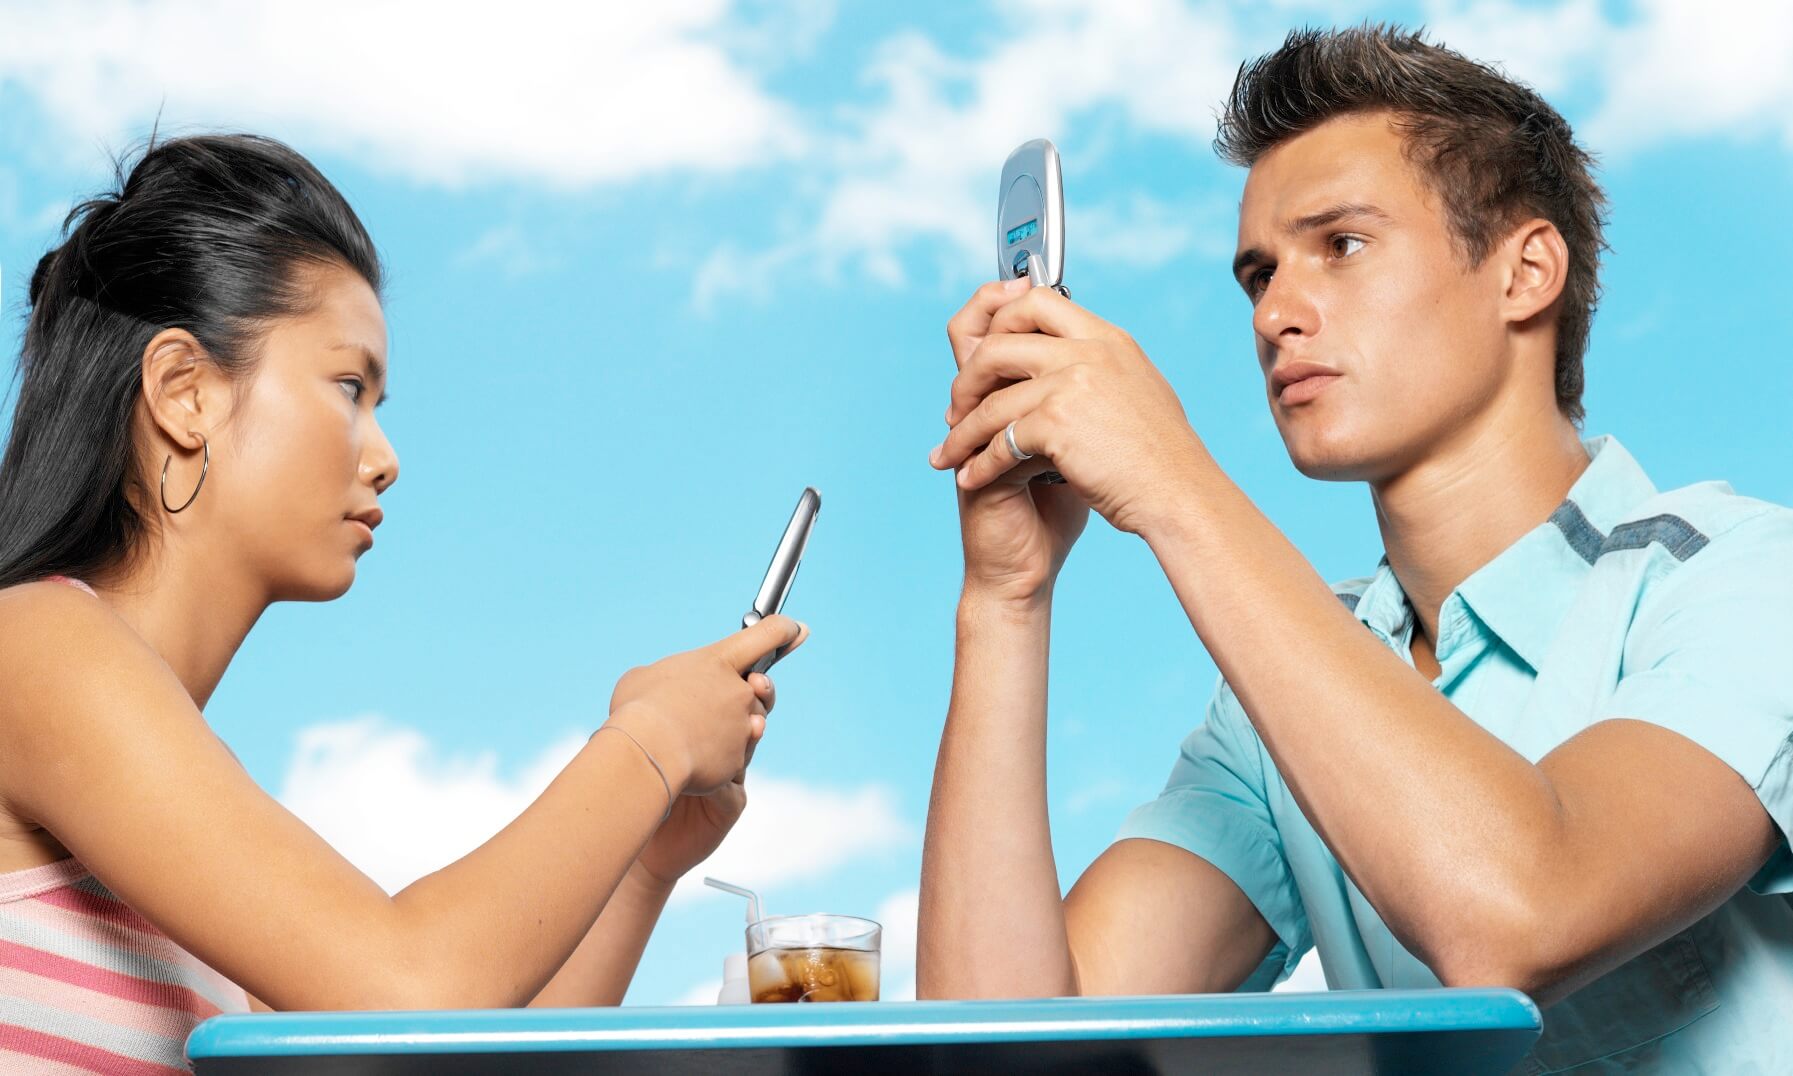 Teenage couple preoccupied with their cell phones ignoring each other at a cafe table